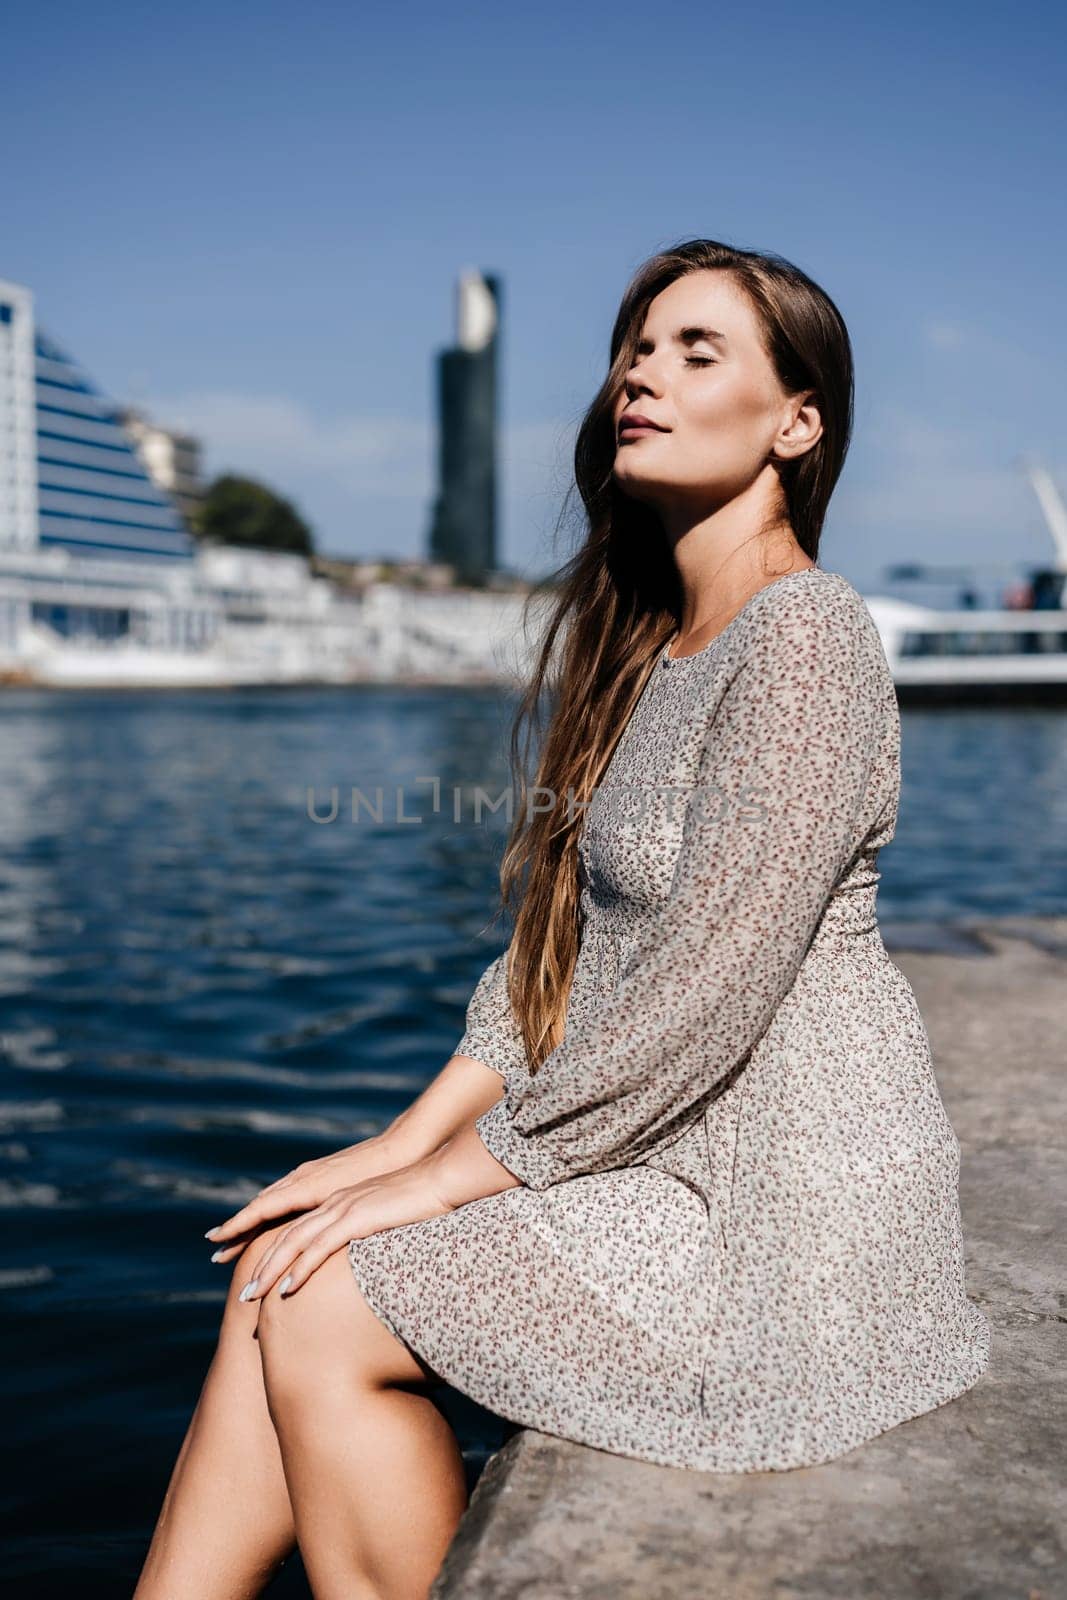 A woman with long hair is sitting on a dock by the water. She is wearing a white dress and she is looking at the water. The scene has a calm and peaceful mood. by Matiunina